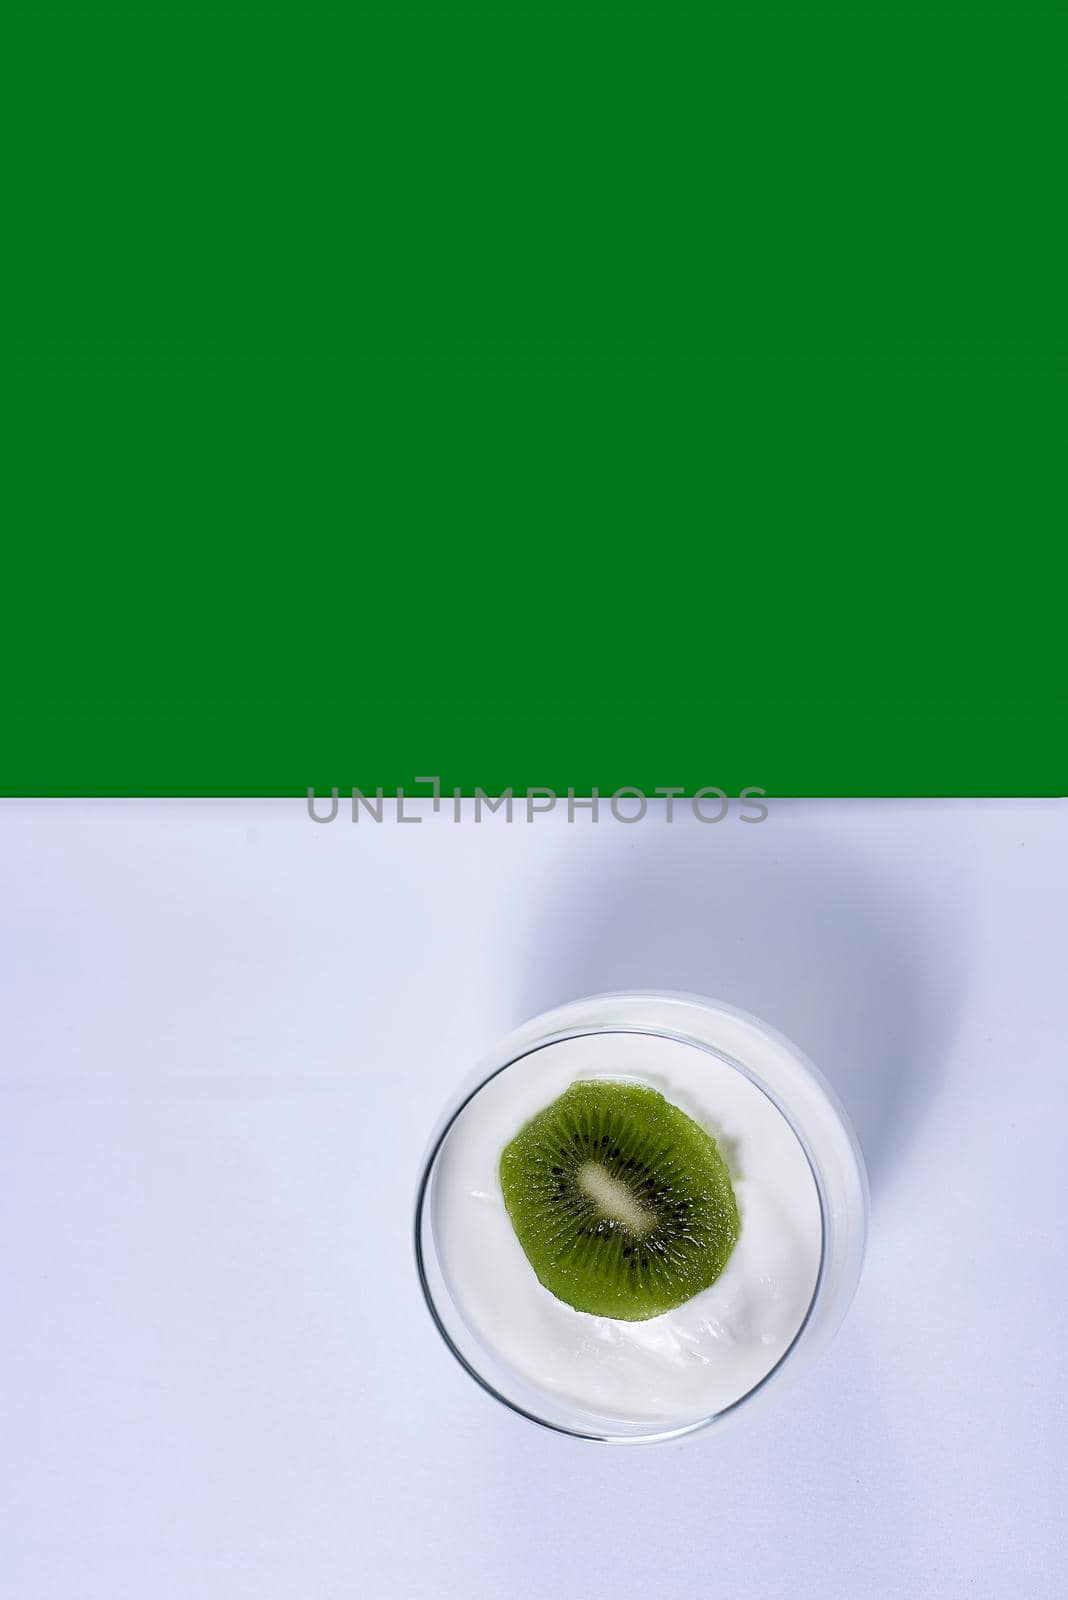 Glass of yoghurt with a sliced kiwi. White and green background, symmetrical, vertical.down